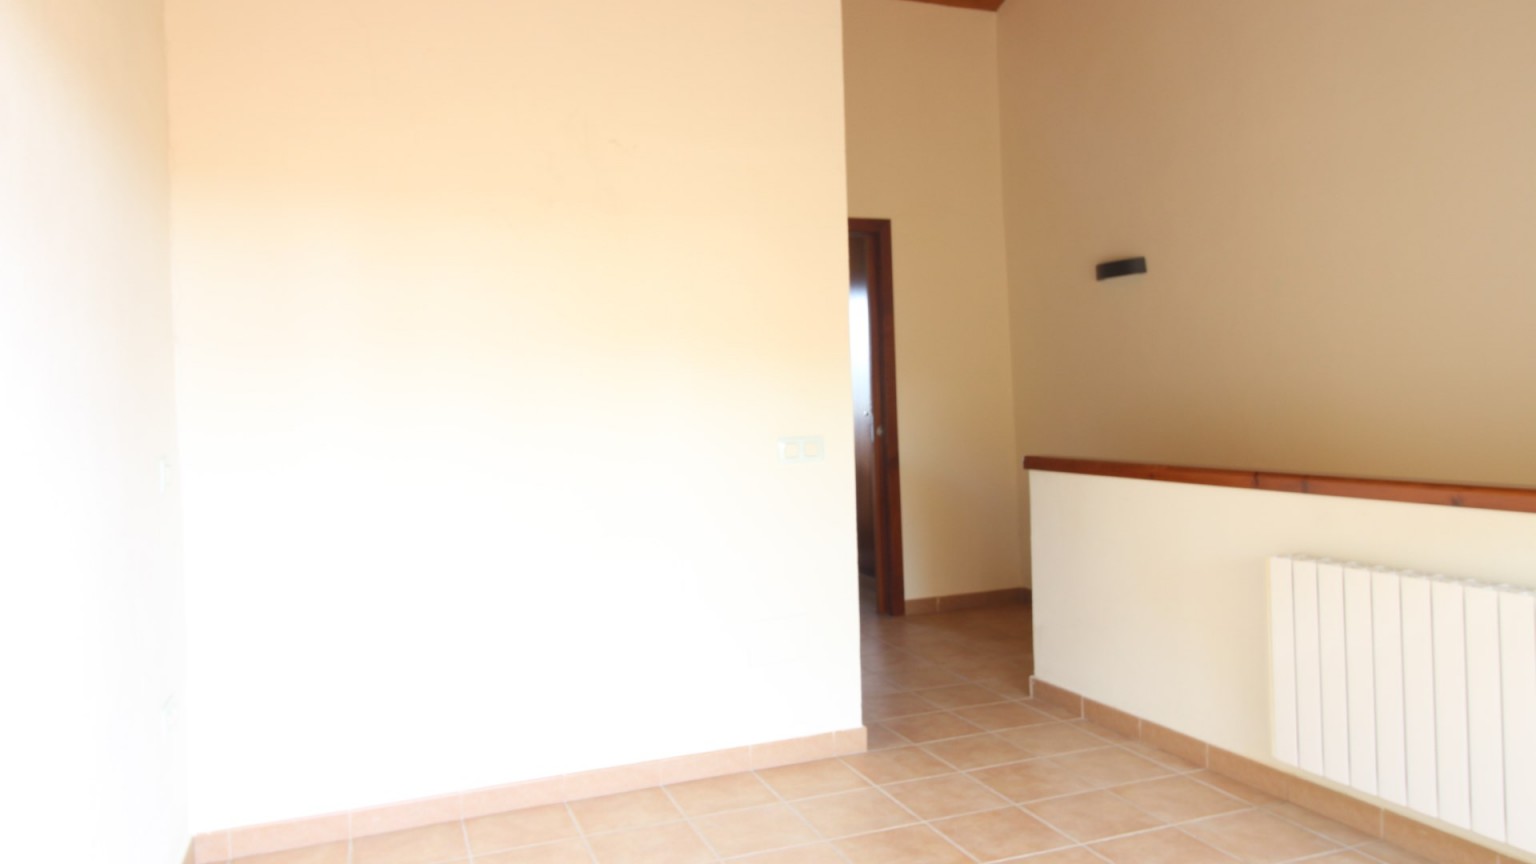 Duplex for sale, 3 bedrooms with parking space in Garriguella.